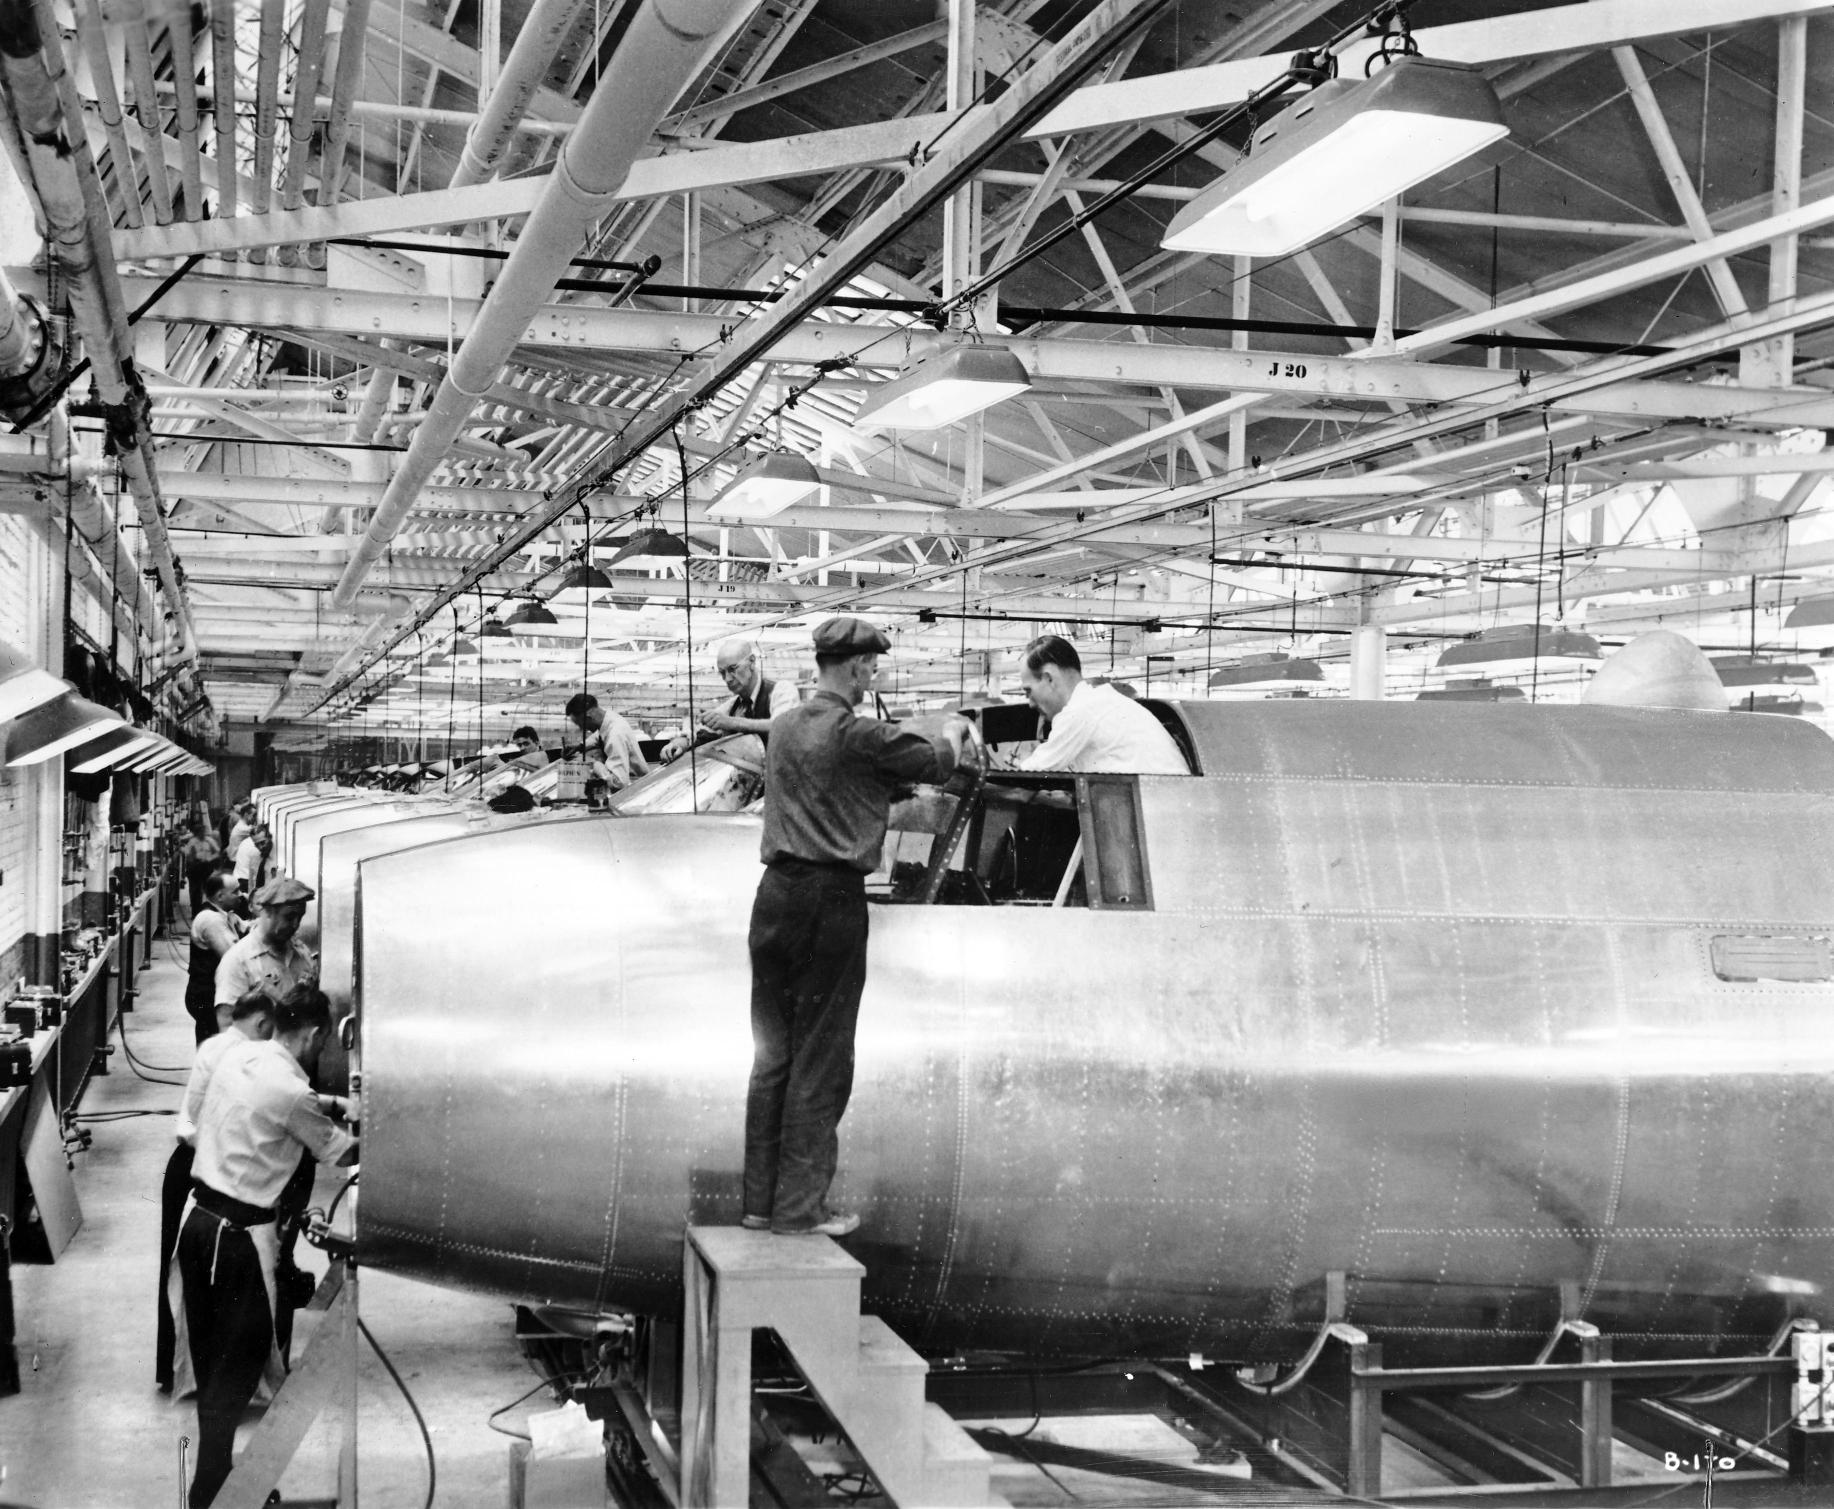 By mid-June 1941, the automaker was purchasing machinery to produce the nose and center fuselage sections for the Martin B-26 Marauder bomber.